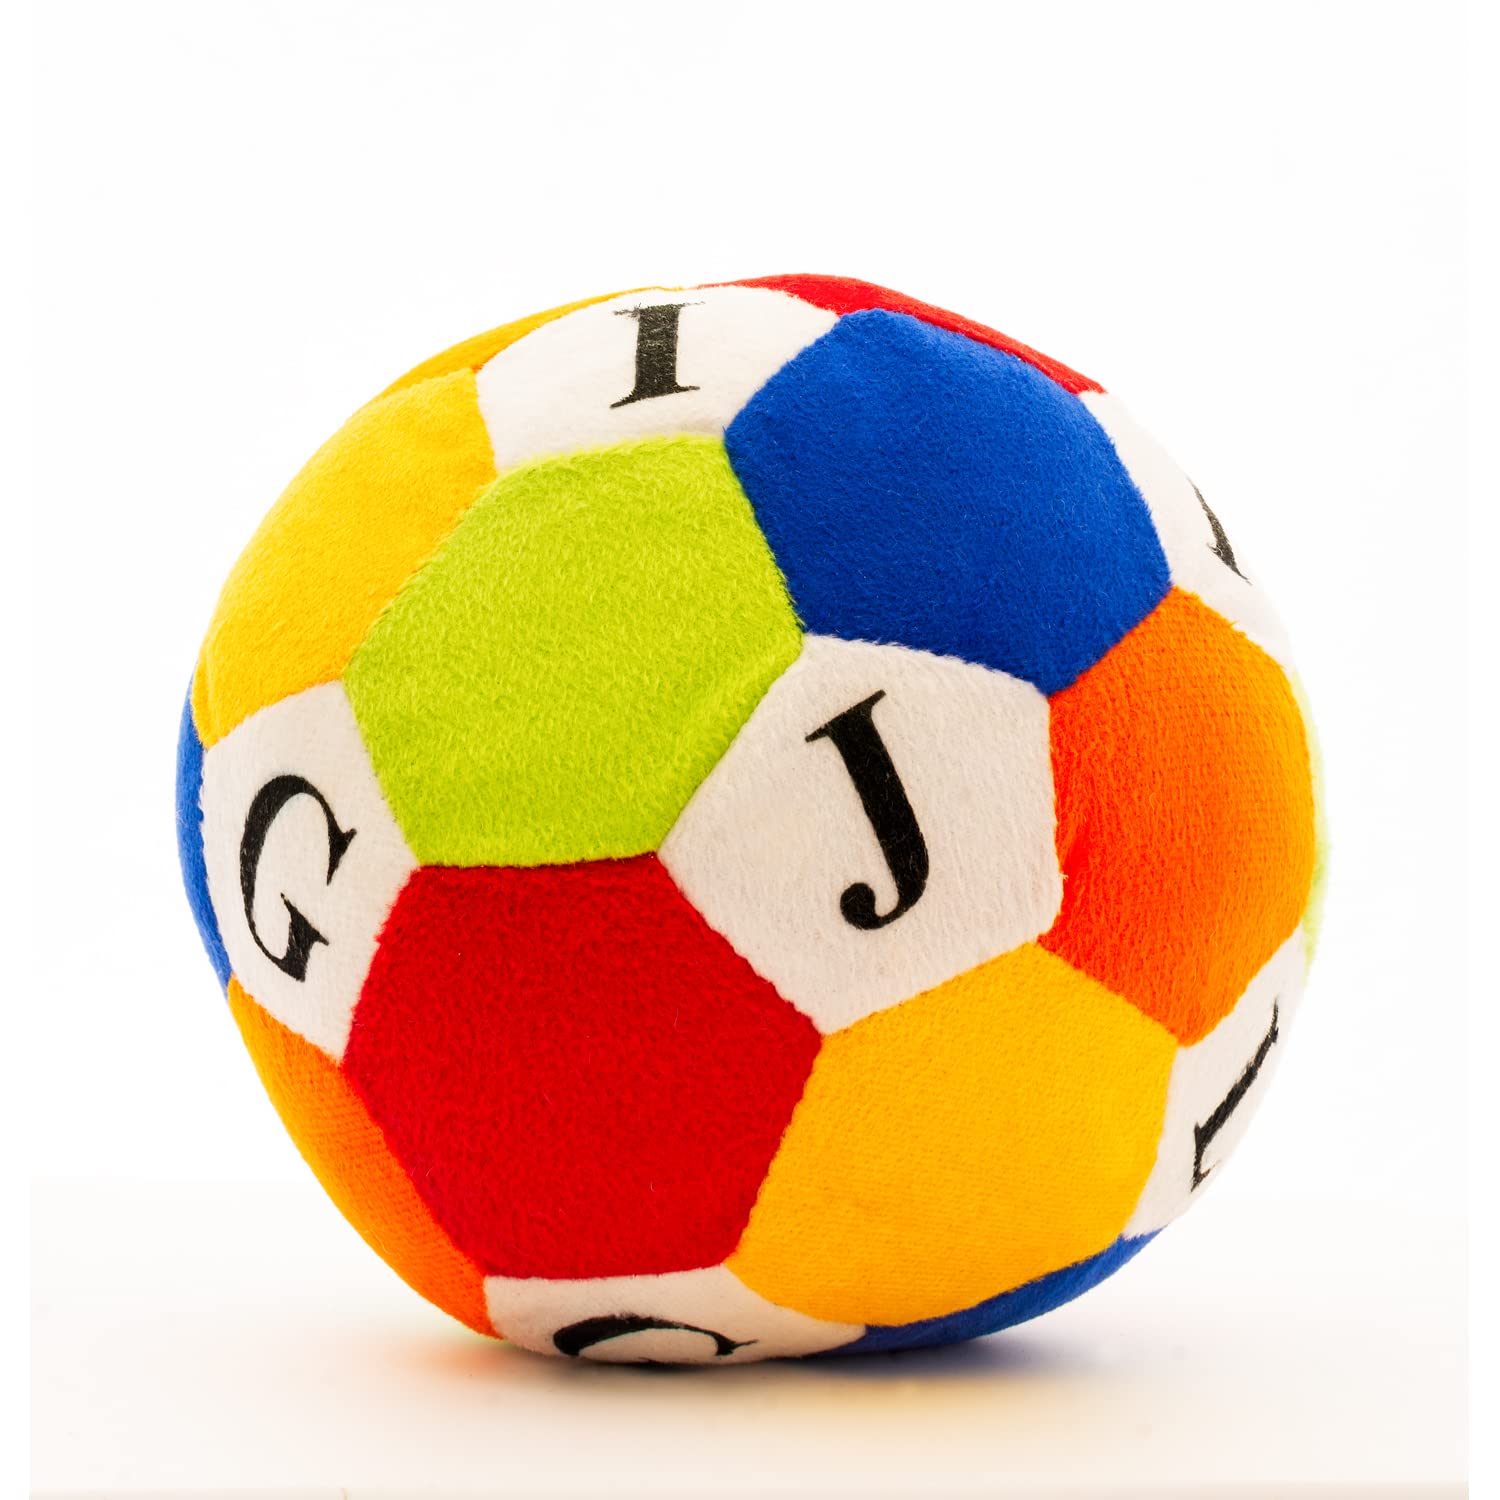 F C Fancy Creation Soft Toy Ball | Football for Kids | Baby Play Balls Pit | Plush Soft Toys for Kids | Kids Soft Ball Toys |Soft Multicolor Stuffed Alphabets Toy Ball Medium Size 26cm